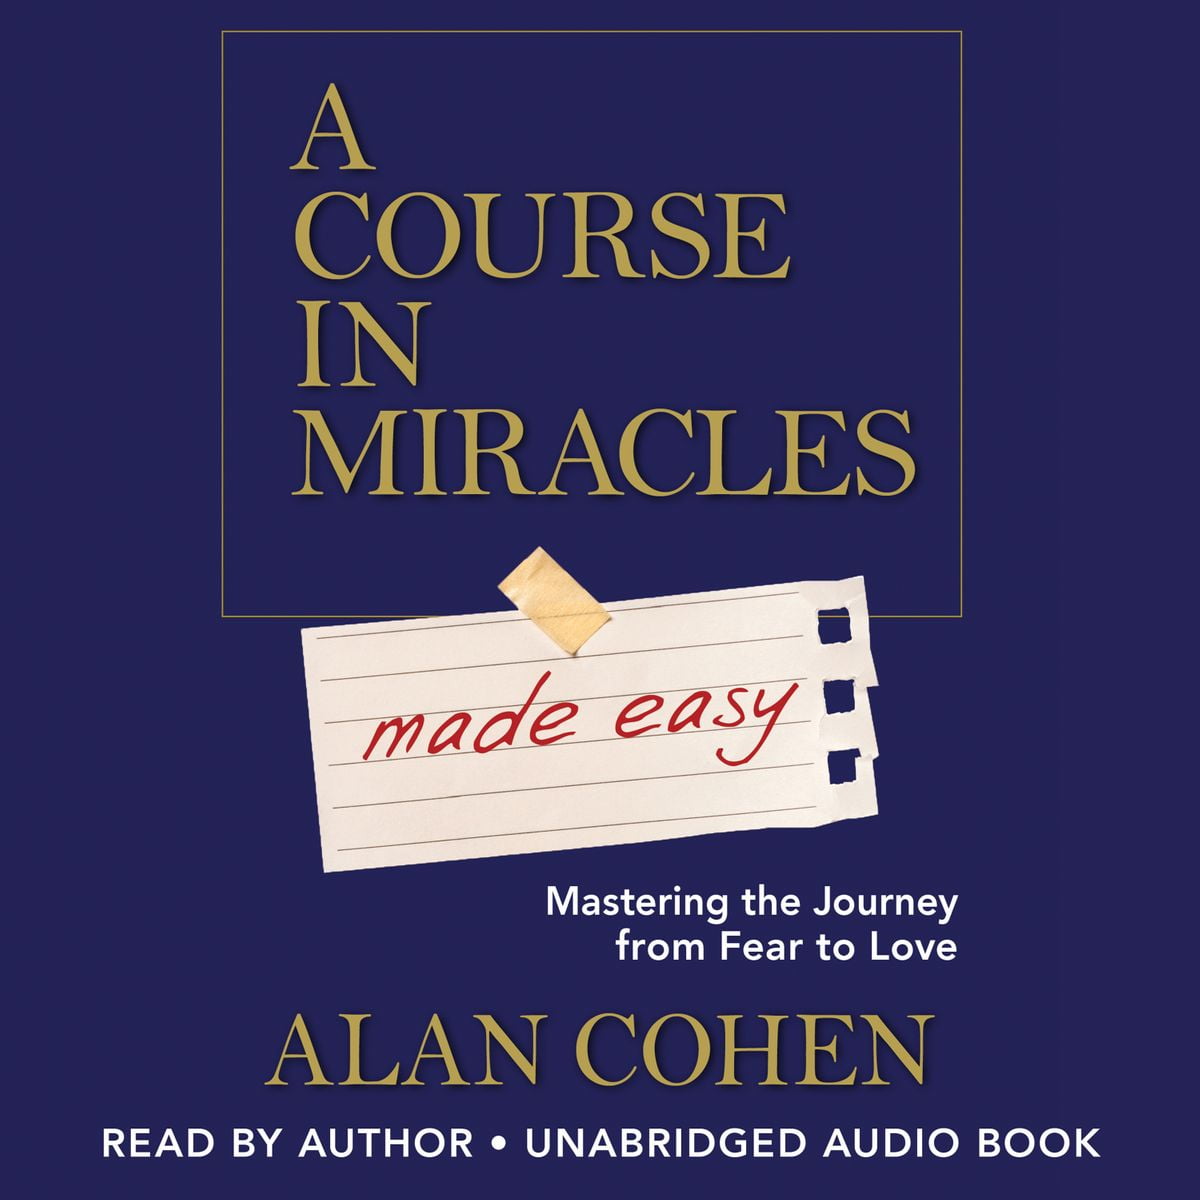 A course in miracles free audiobook